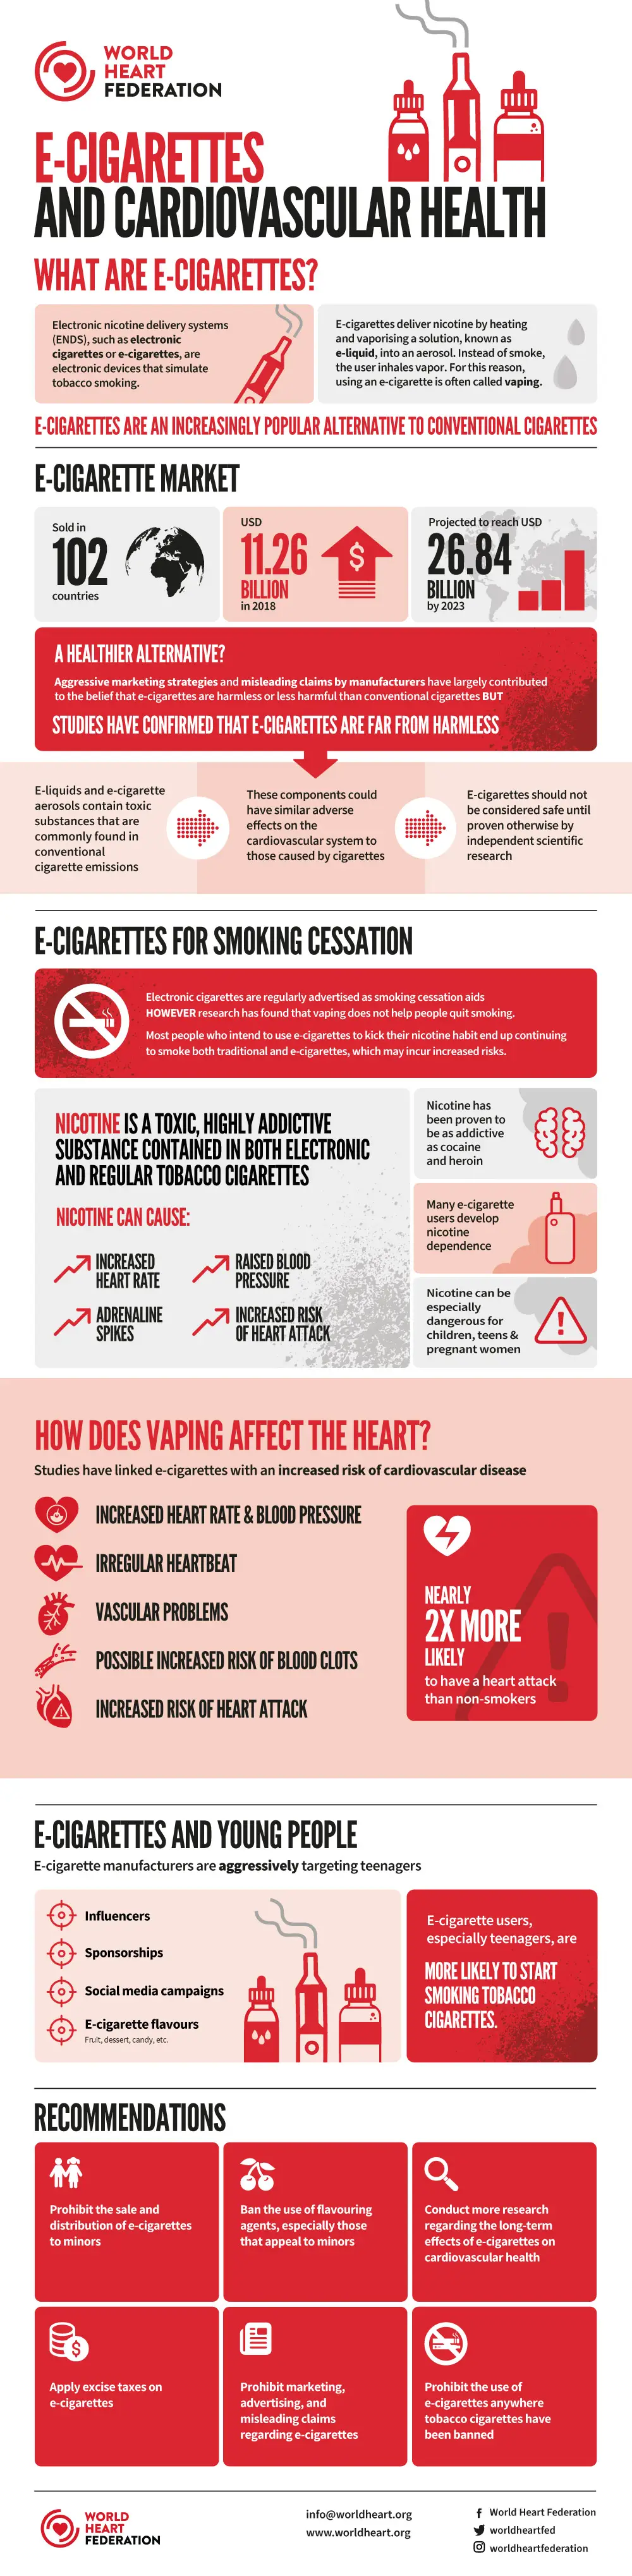 World Heart Federation infographic on E-Cigarettes and Cardiovascular Disease